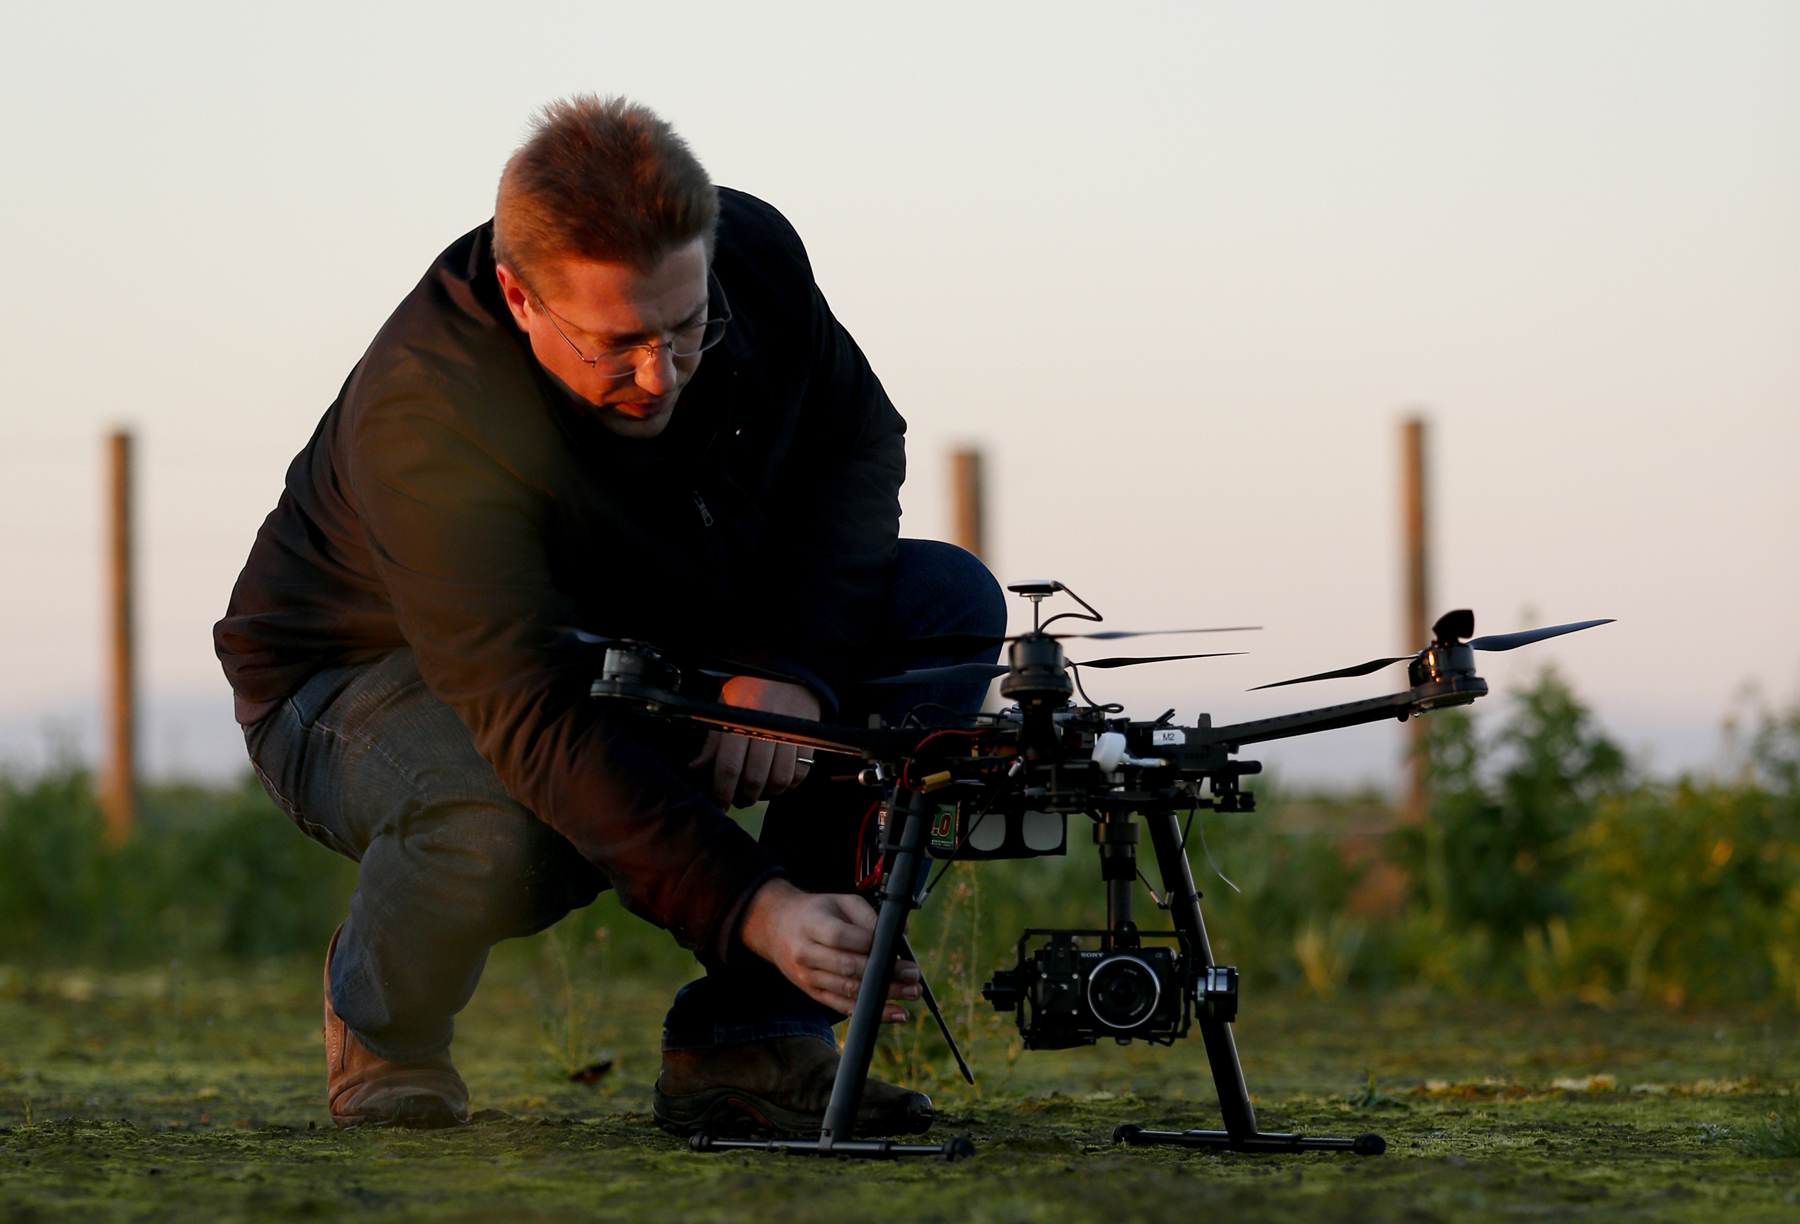 Dr. Gregory Kriehn works on a drone.